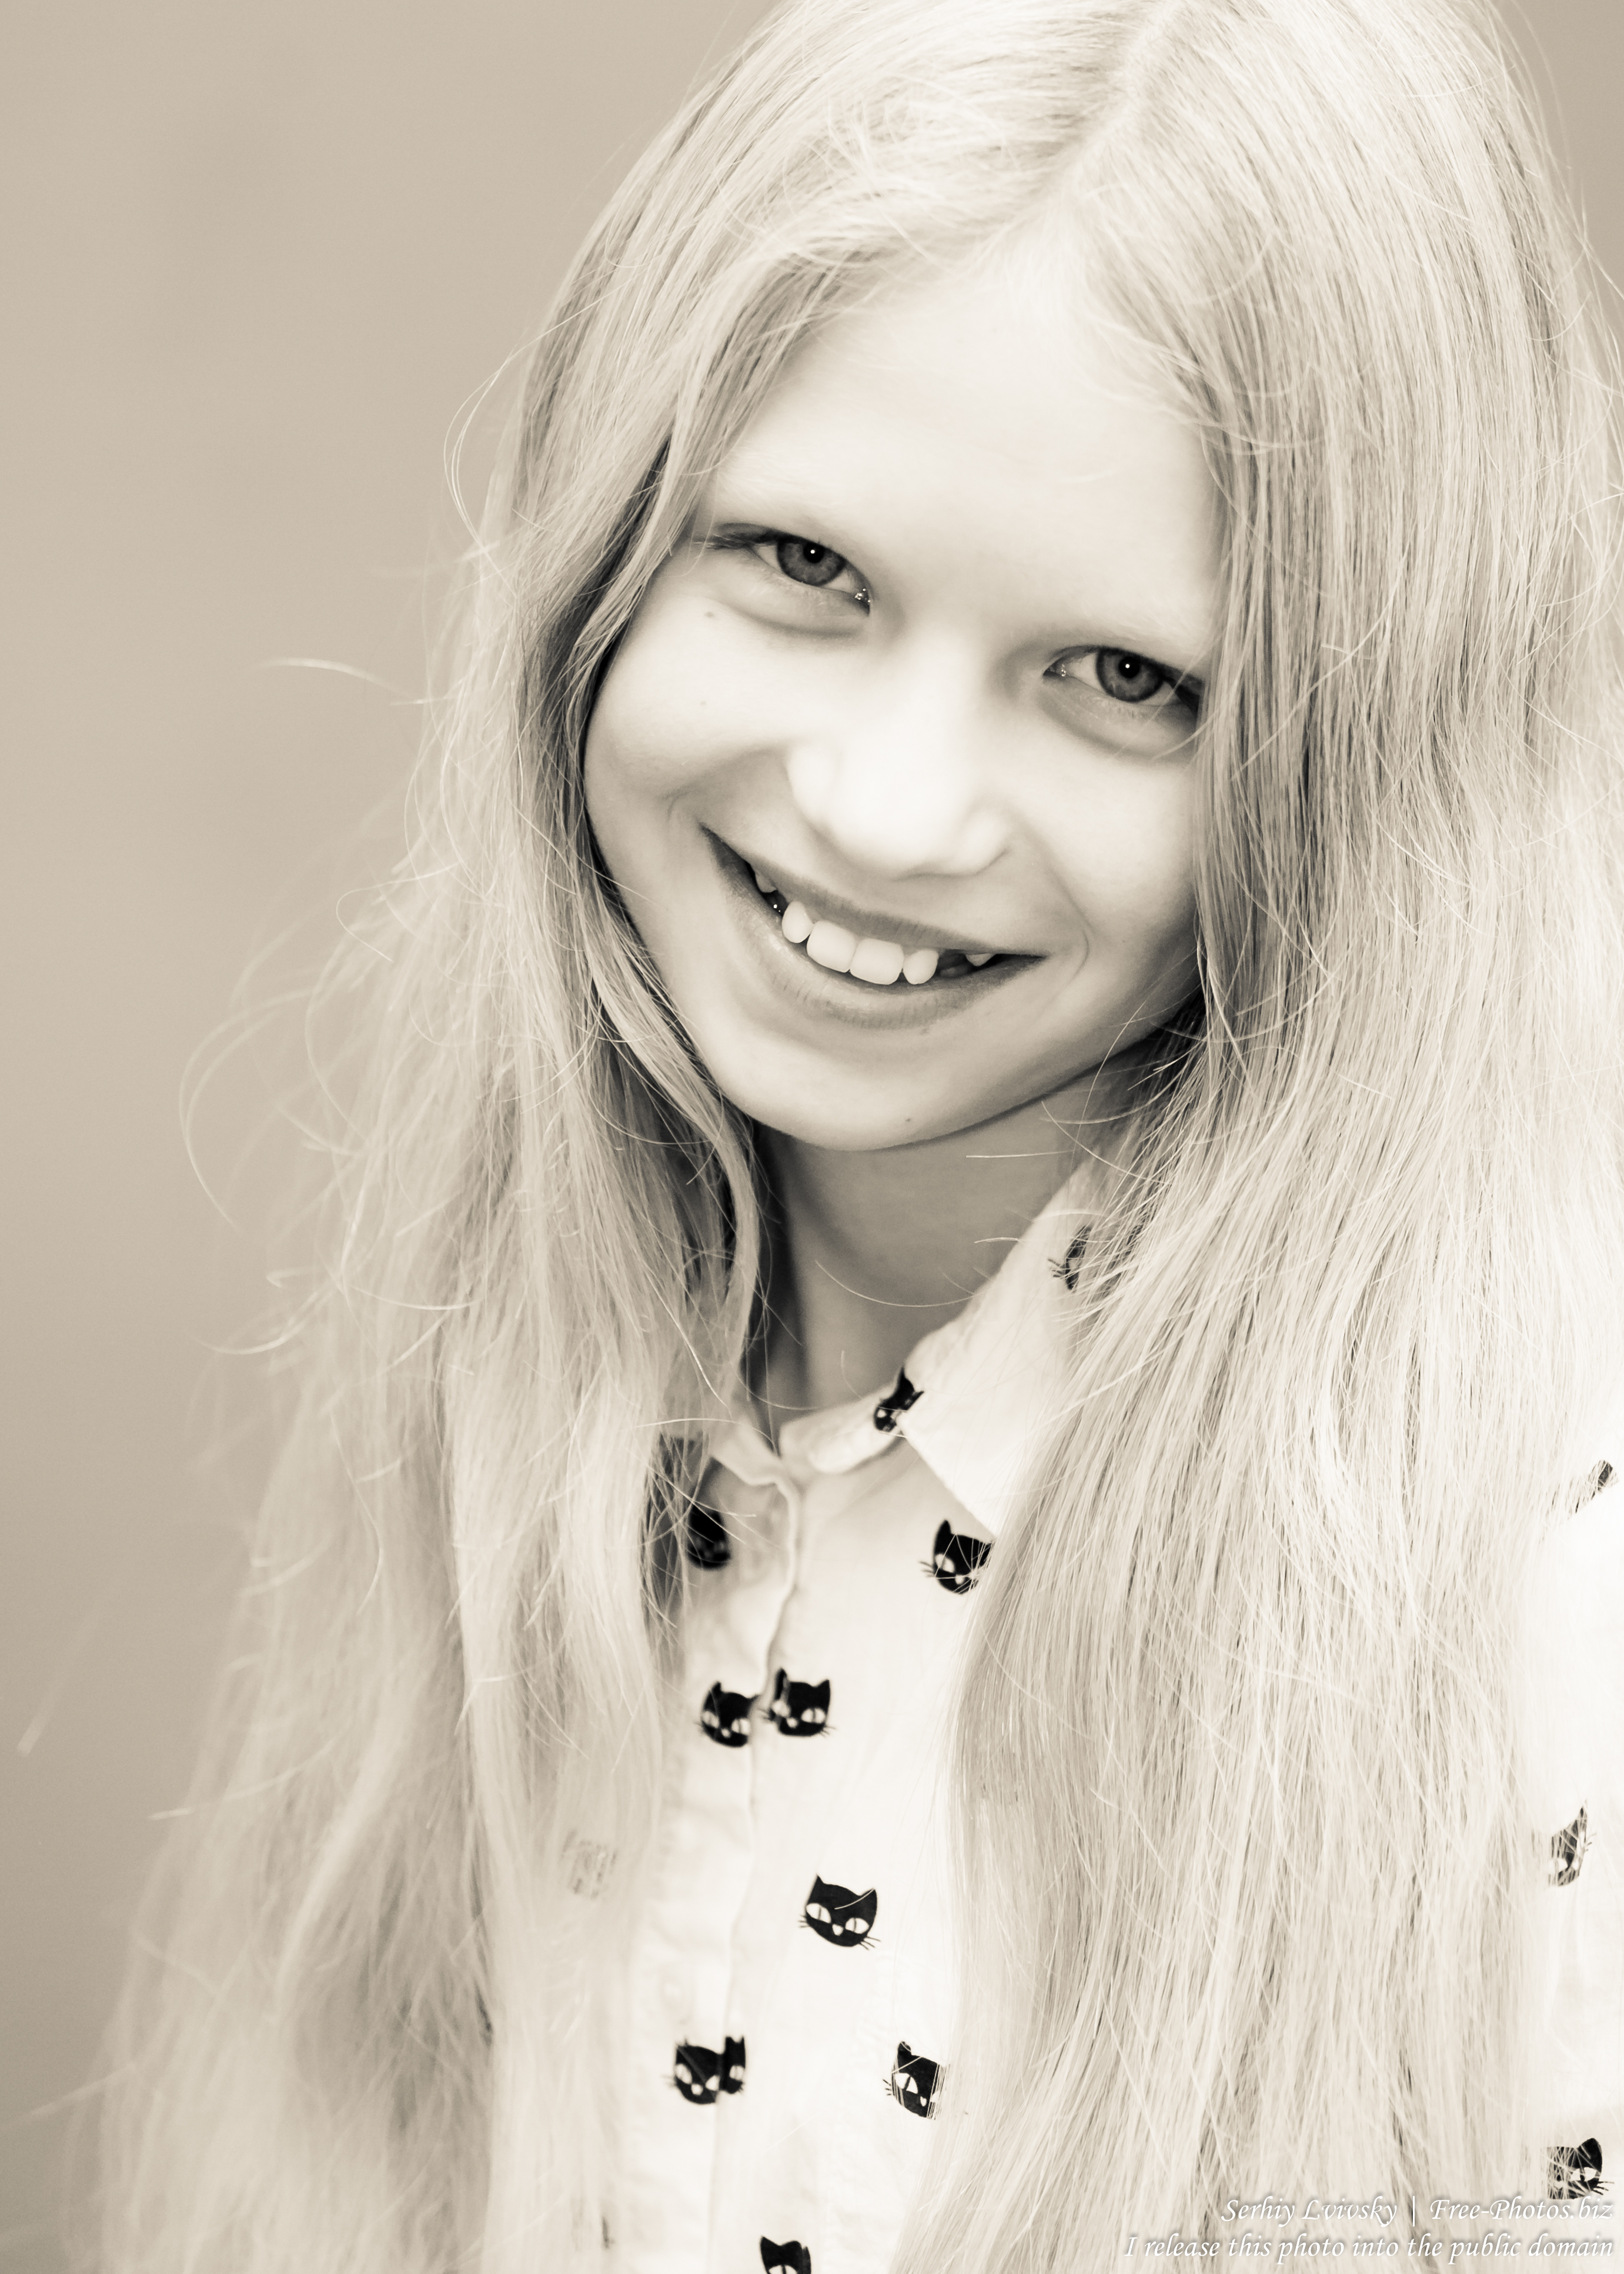 a 12-year-old natural blond Catholic girl photographed by Serhiy Lvivsky in November 2015, picture 2